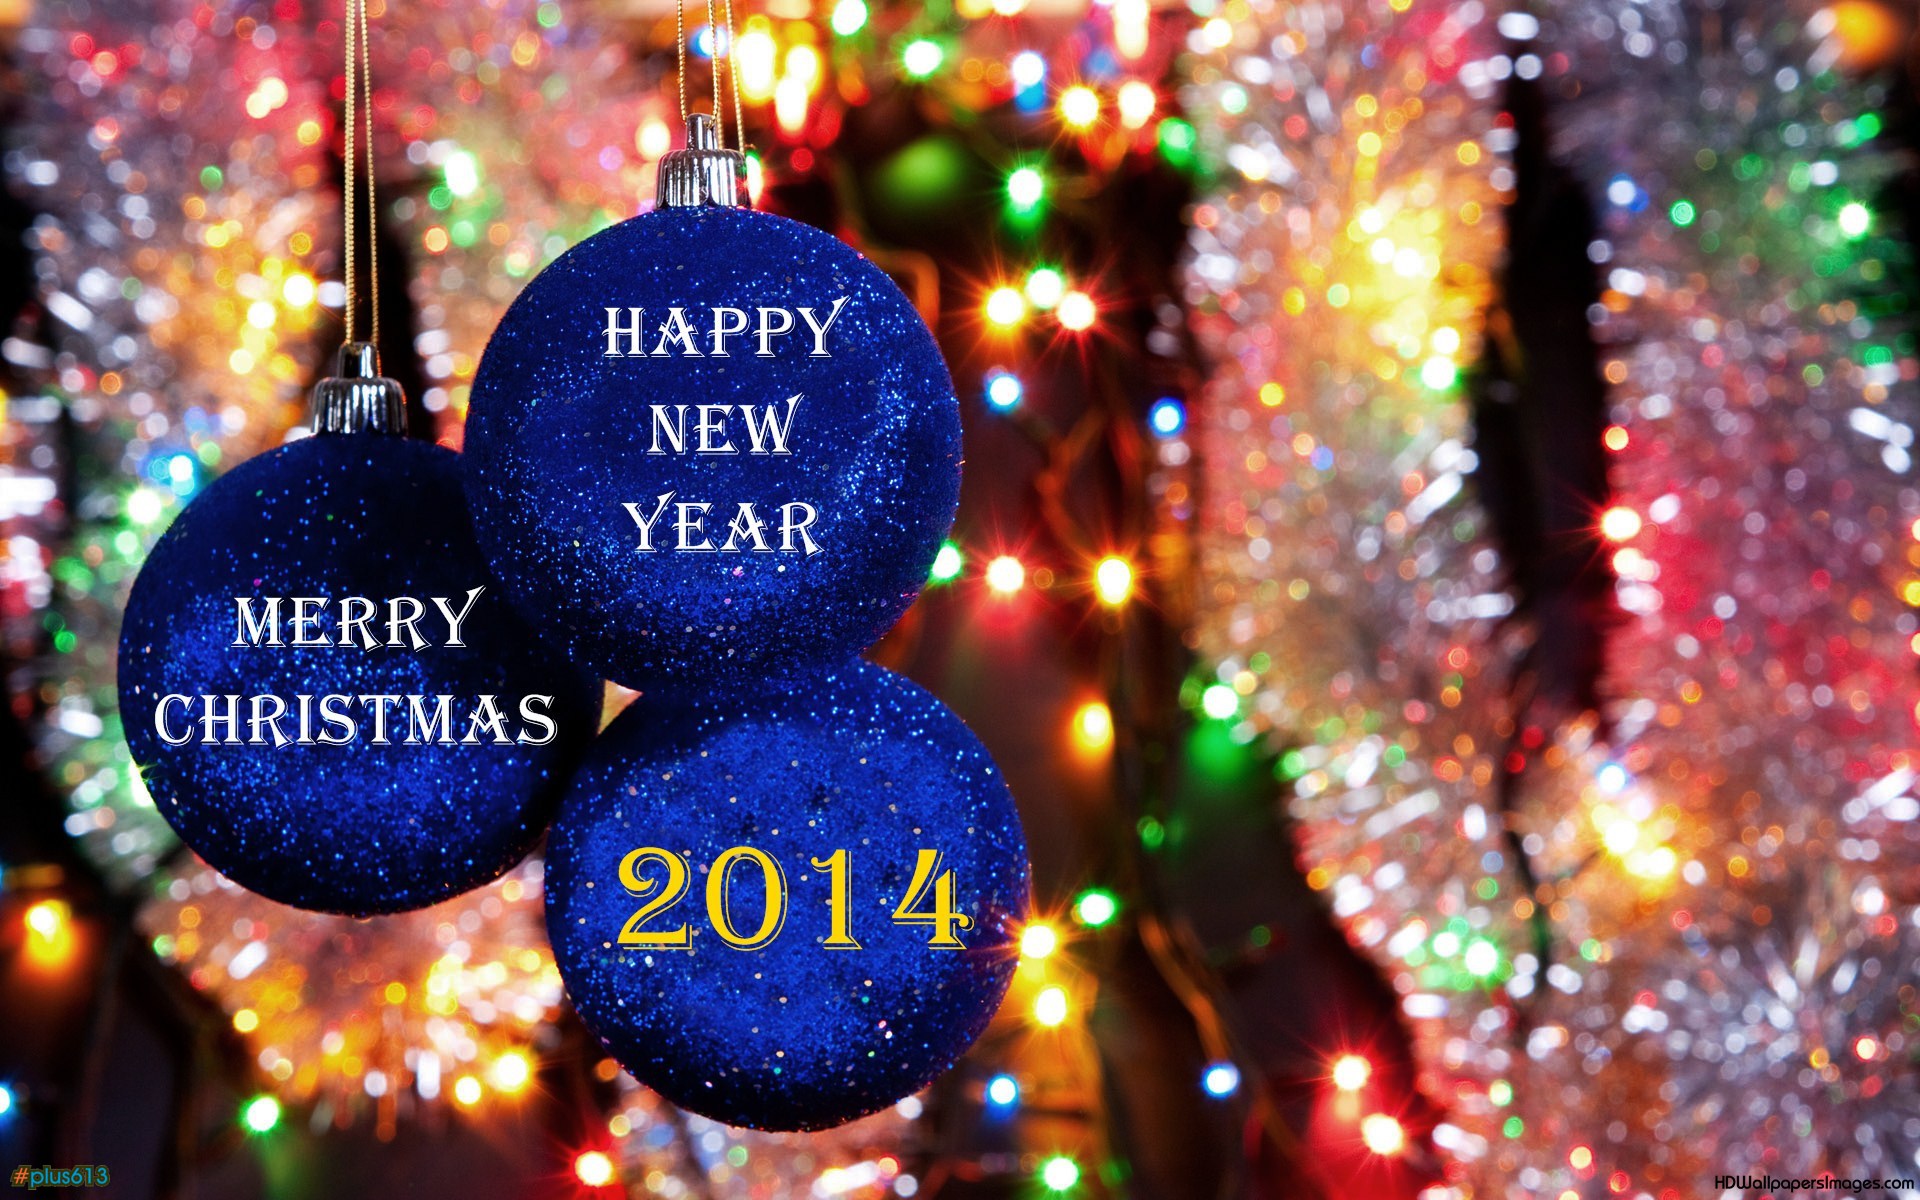 Merry Christmas and Happy New Year 2013-2014